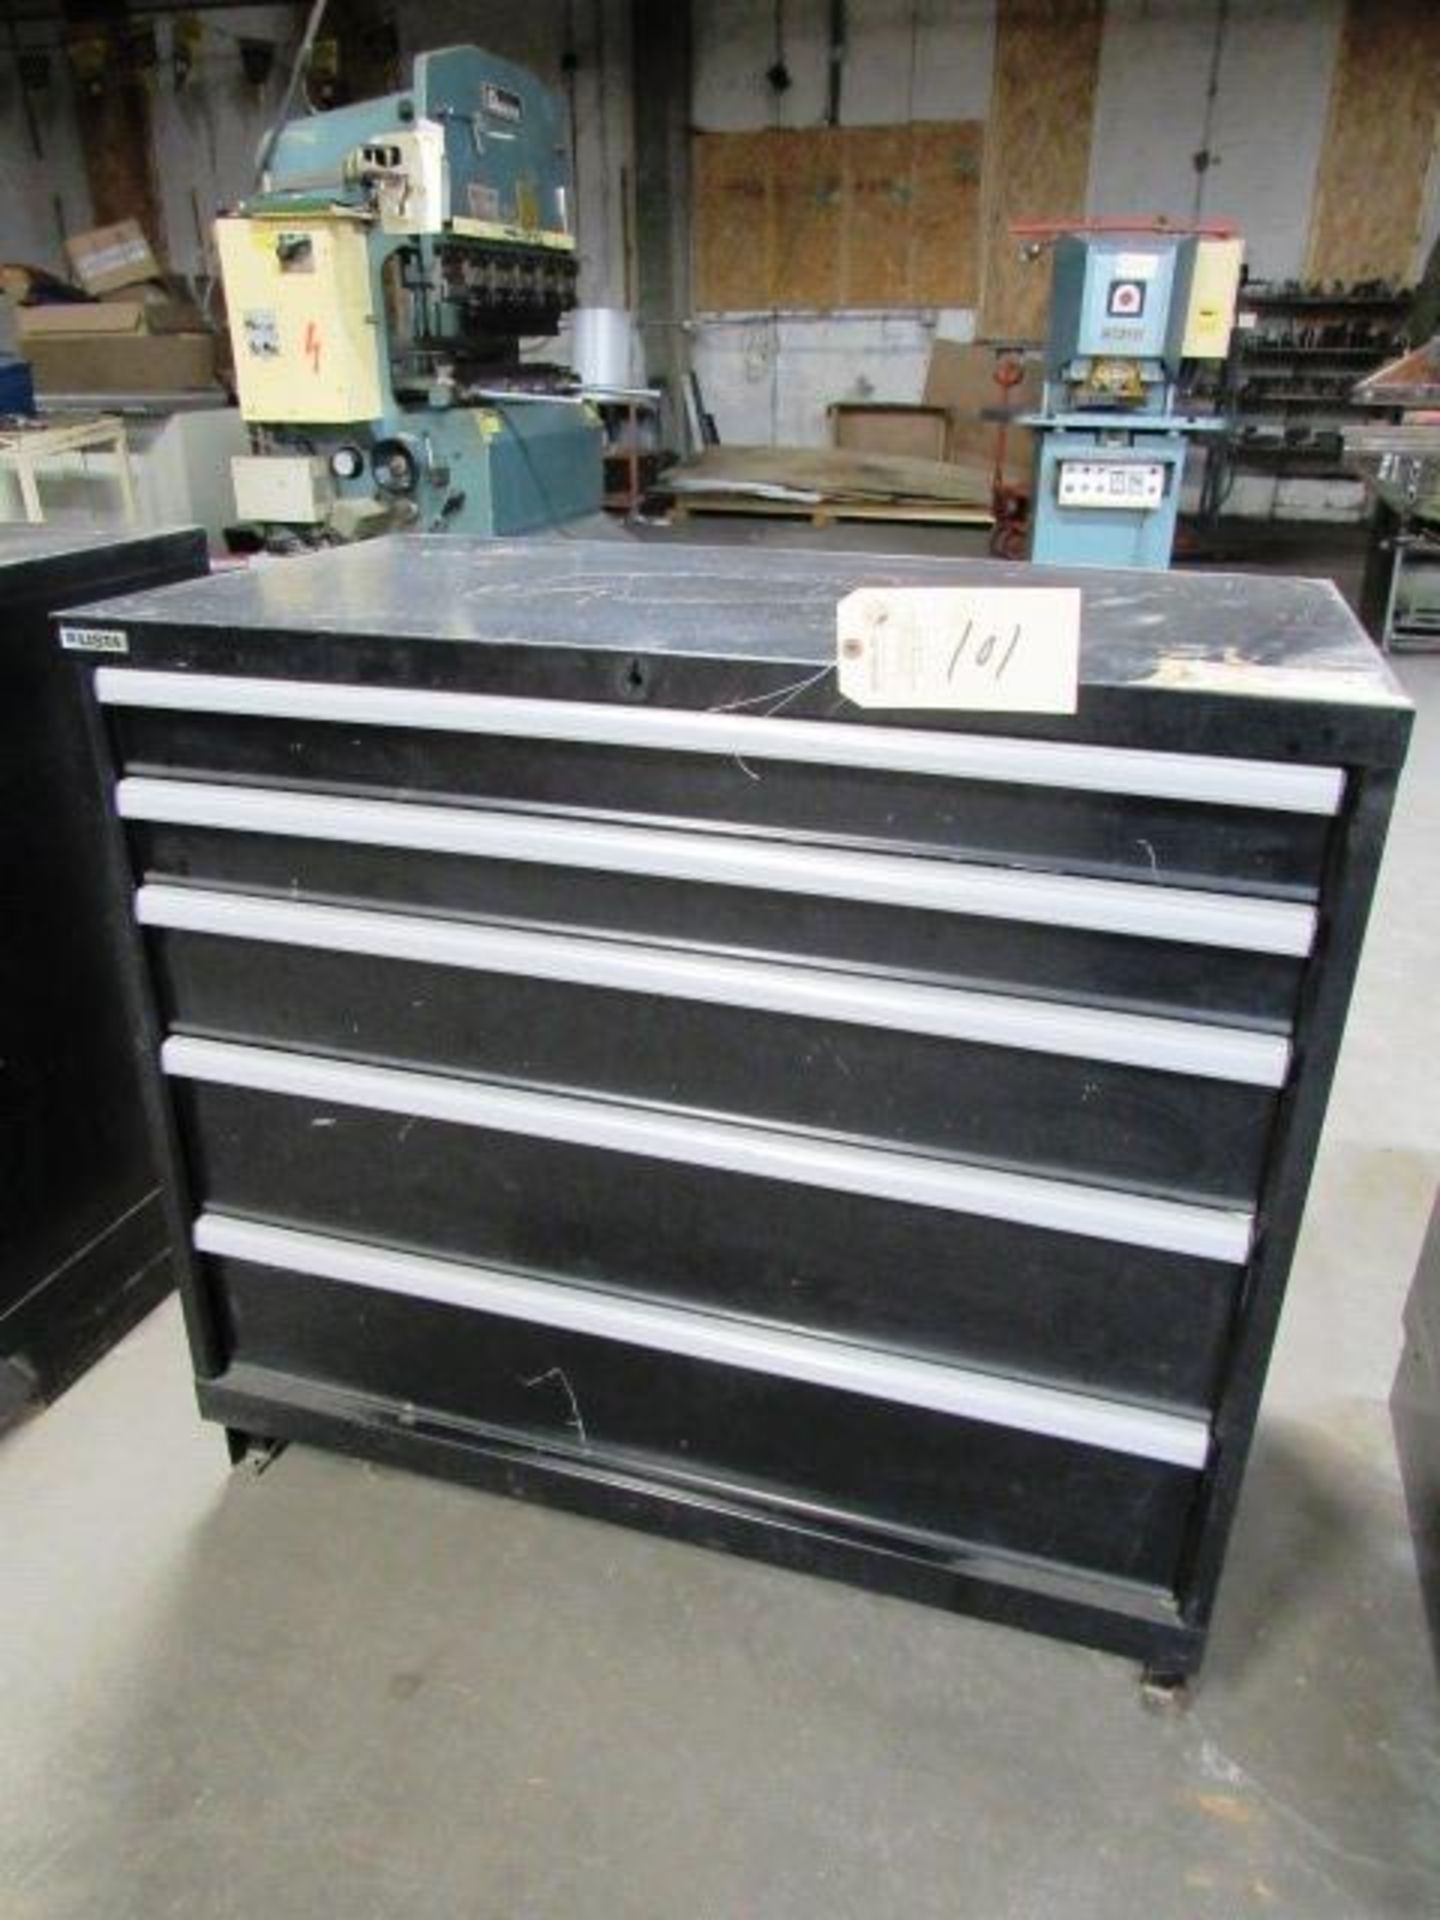 Lista 5 Drawer Cabinet with Press Brake Dies - Image 2 of 7